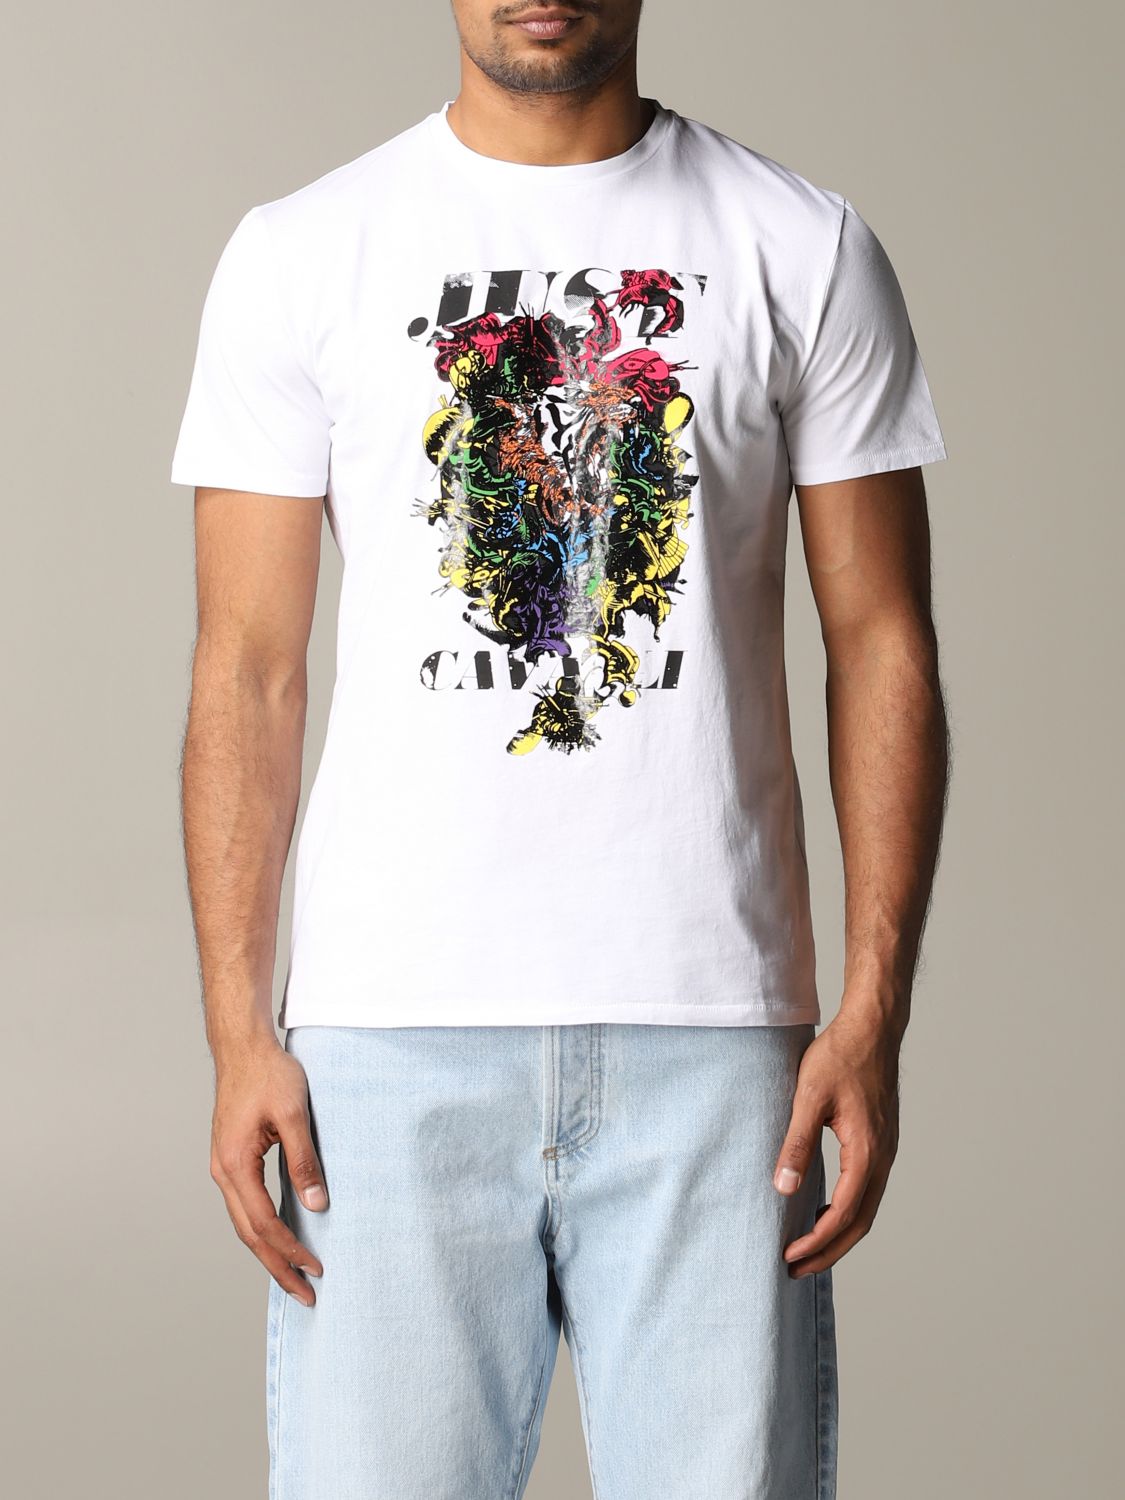 Just Outlet: t-shirt for man - White | Cavalli t-shirt S01GC0626 N20663 online on